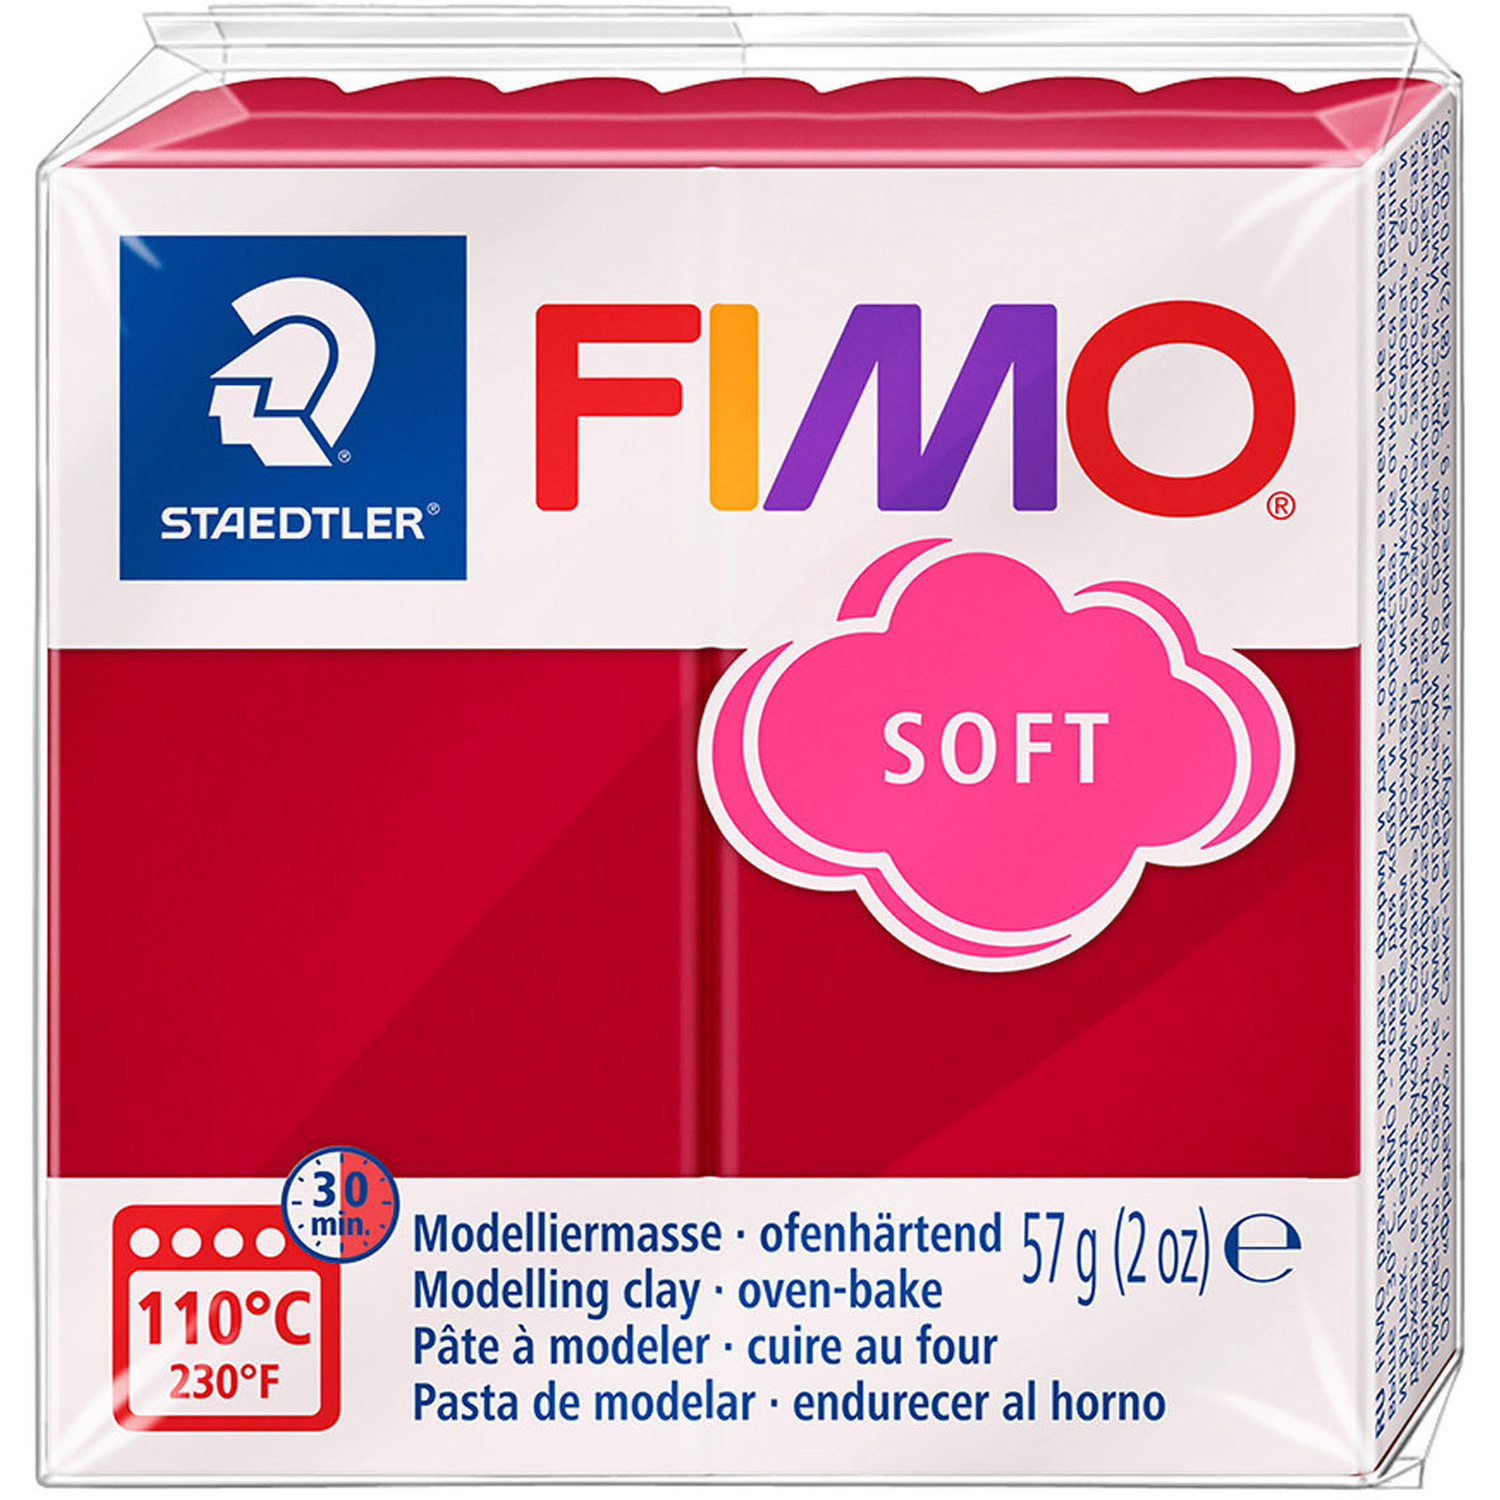 Staedtler FIMO Soft Modelling Clay Block - Cherry Red Image 1